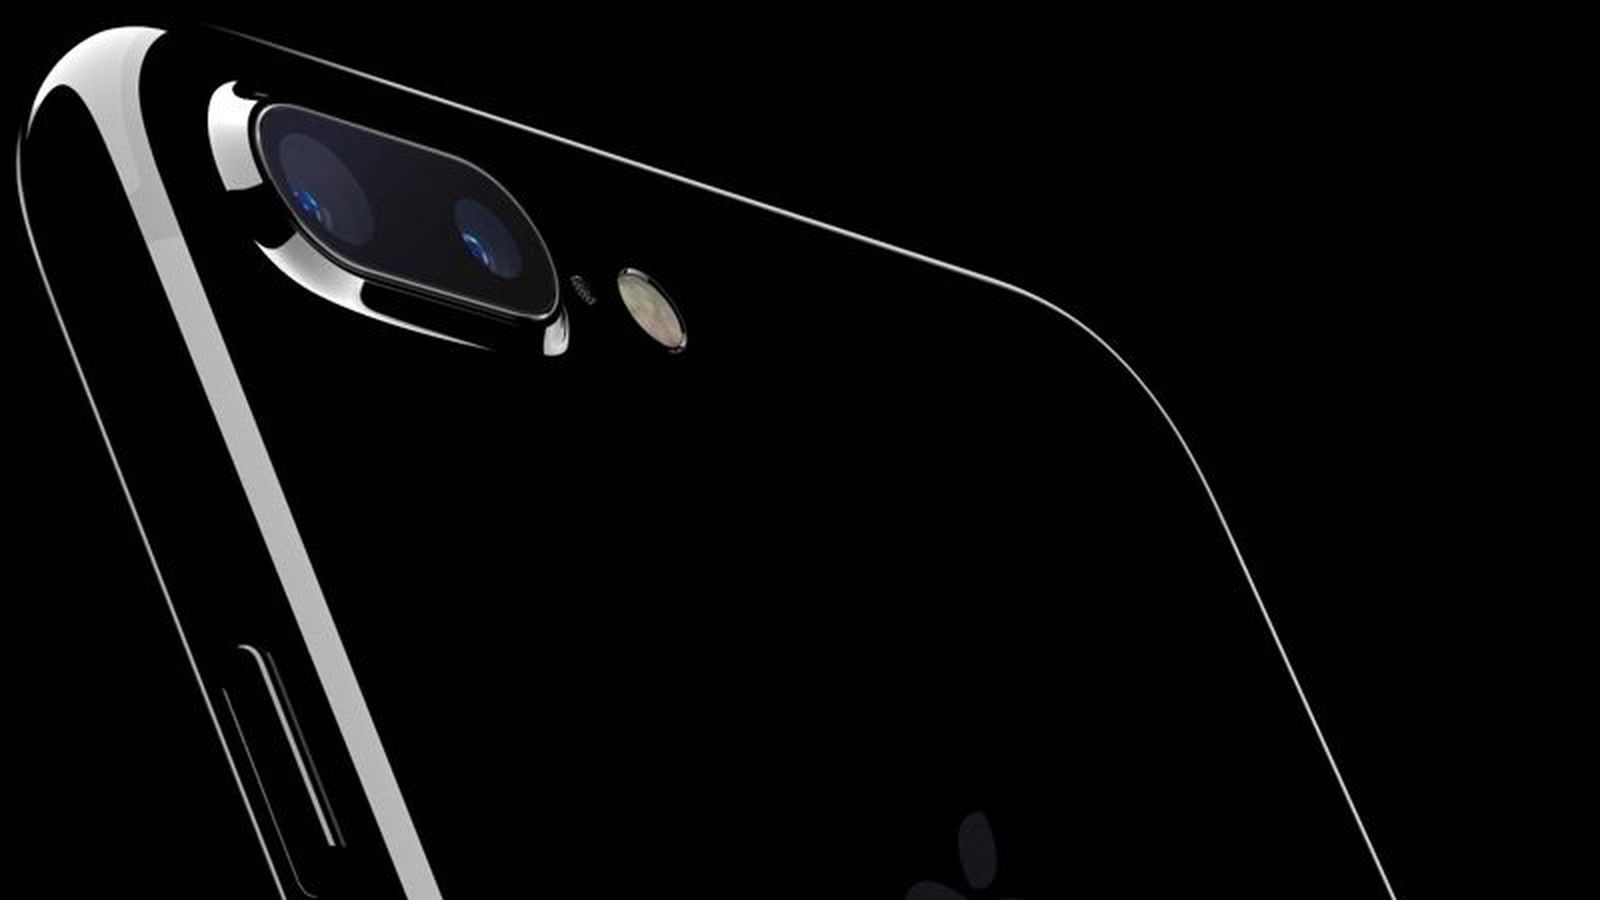 iPhone XS vs iPhone 8 Plus: Why The 8 Plus Is A More Sensible Choice